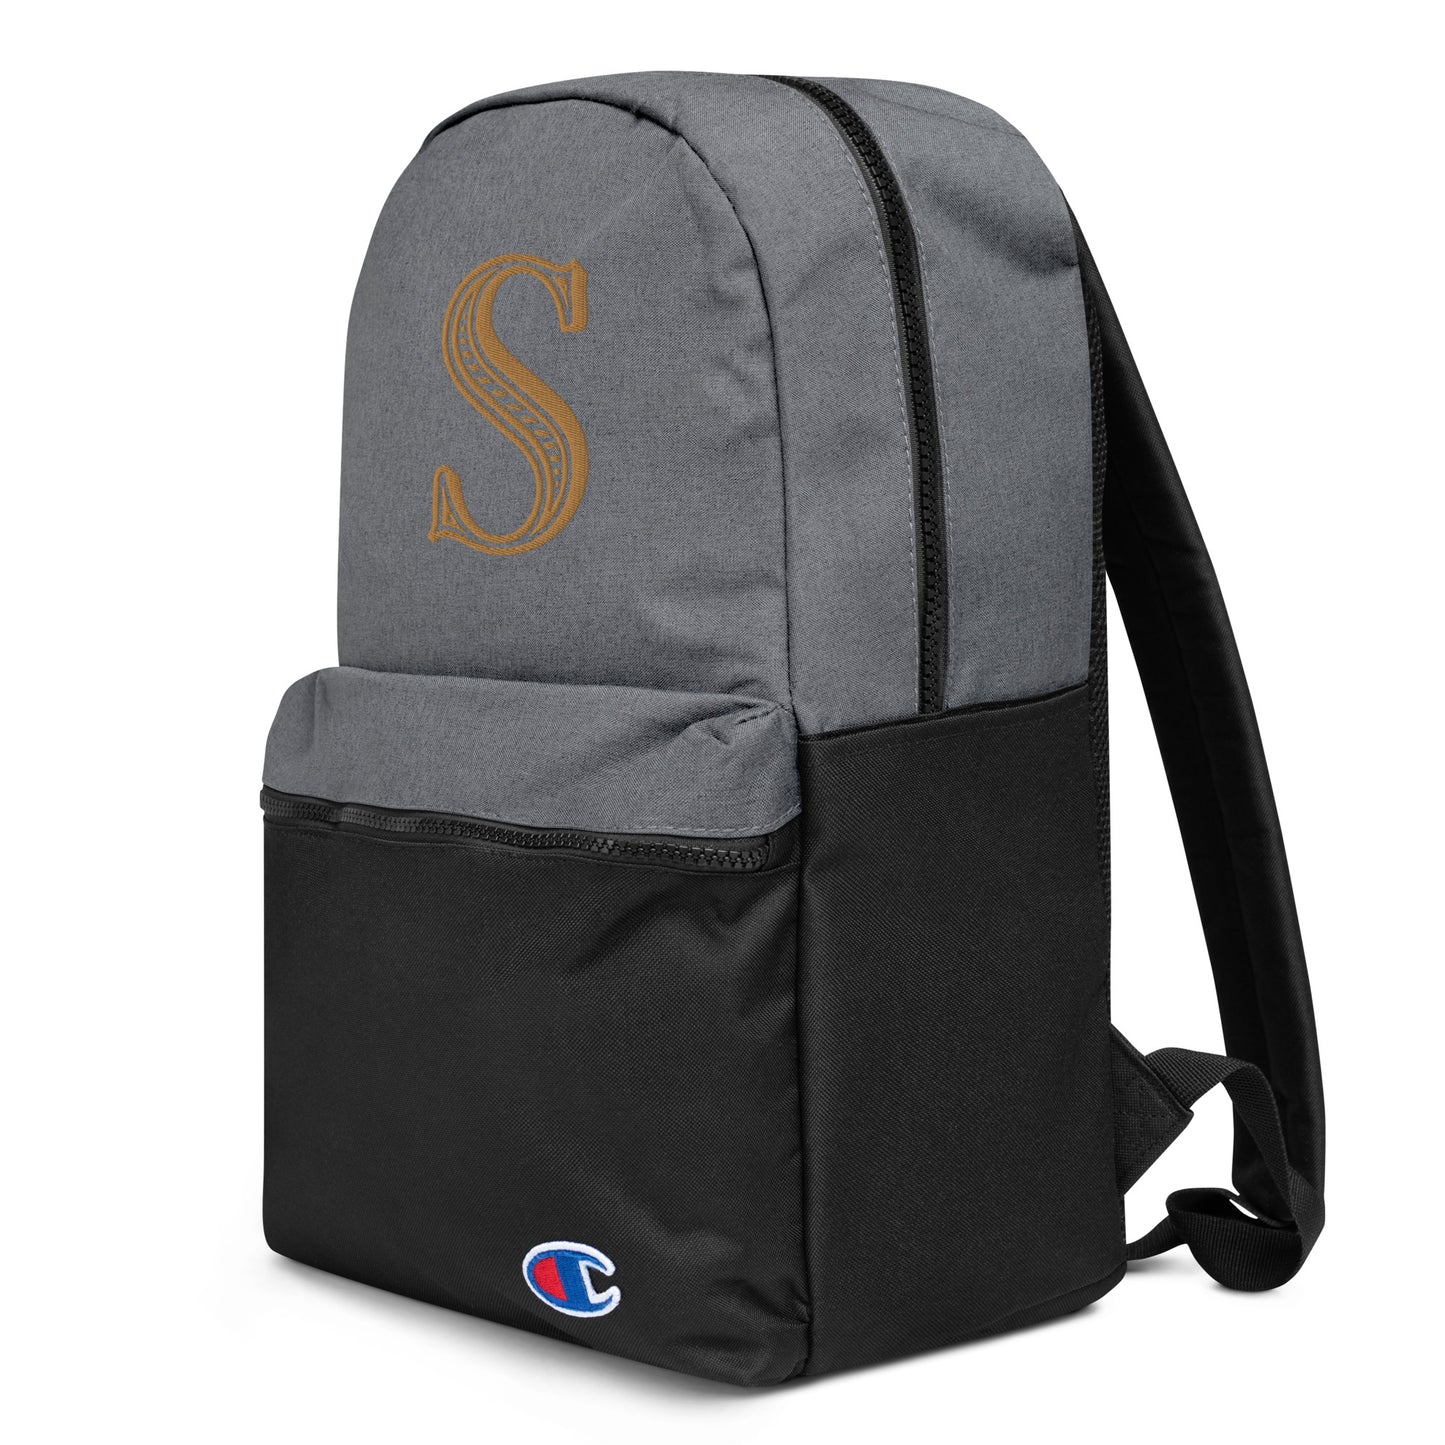 S Champion Backpack